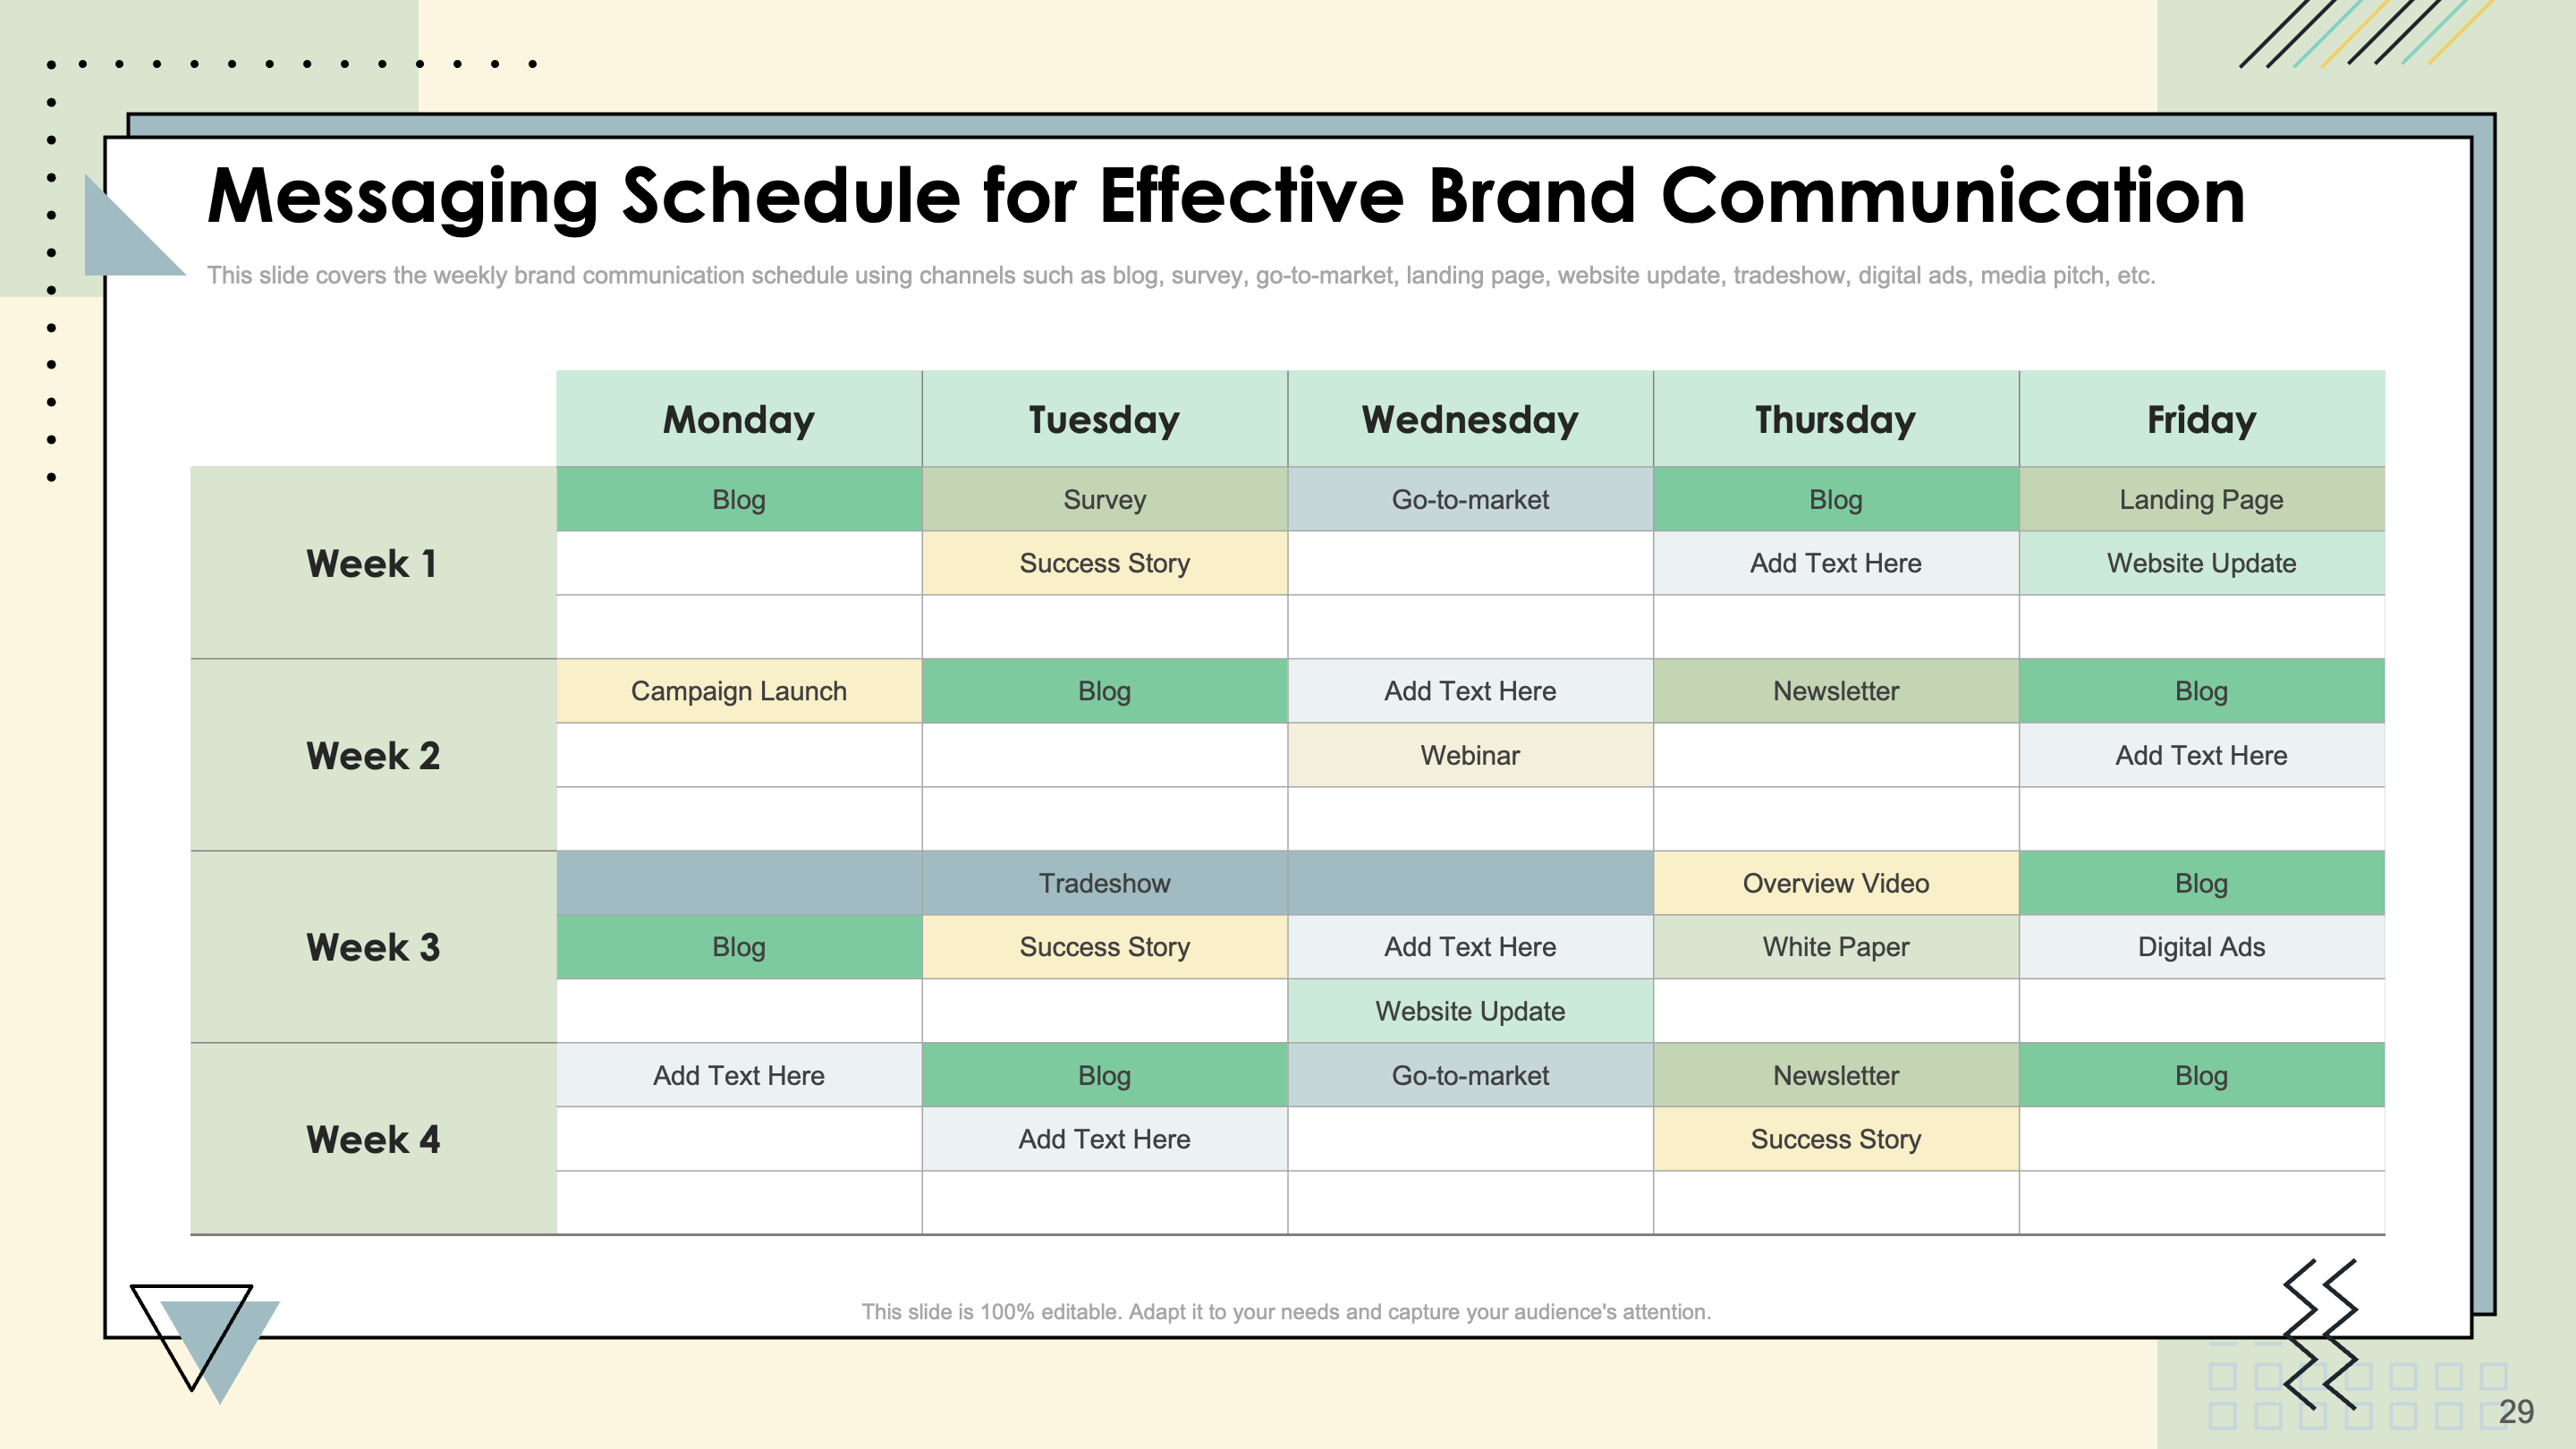 Messaging Schedule for Effective Brand Communication 